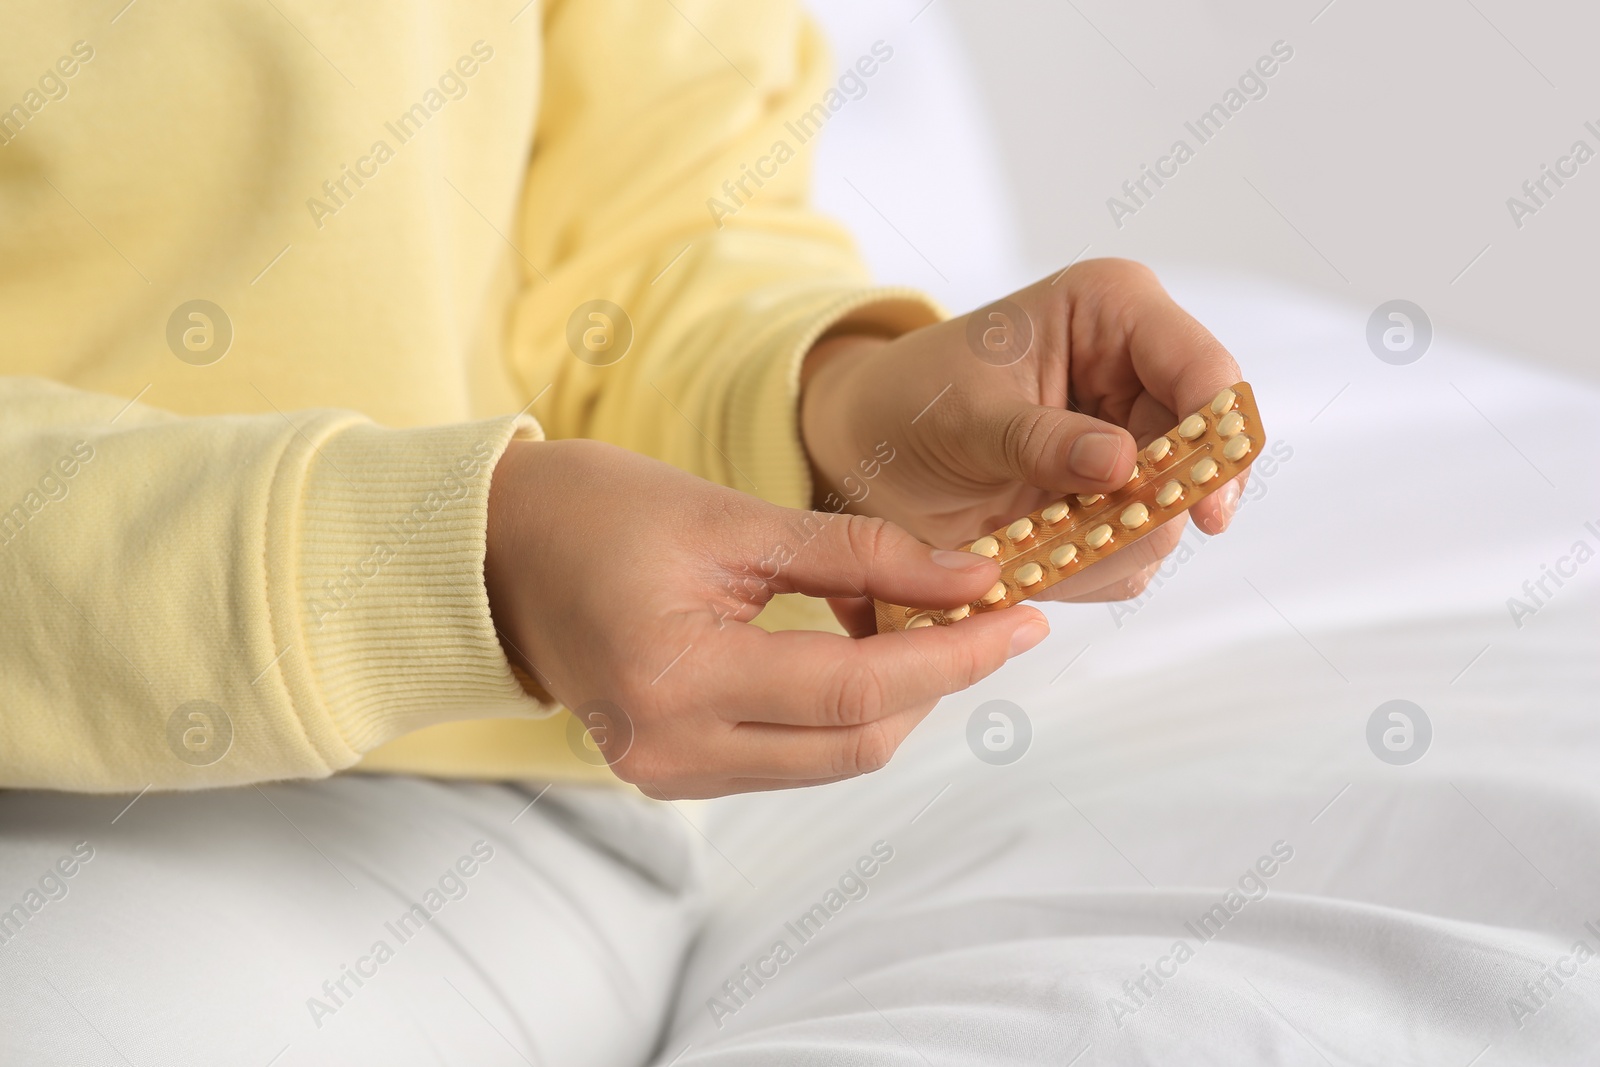 Photo of Woman taking blister of oral contraception pill in bedroom, focus on hands